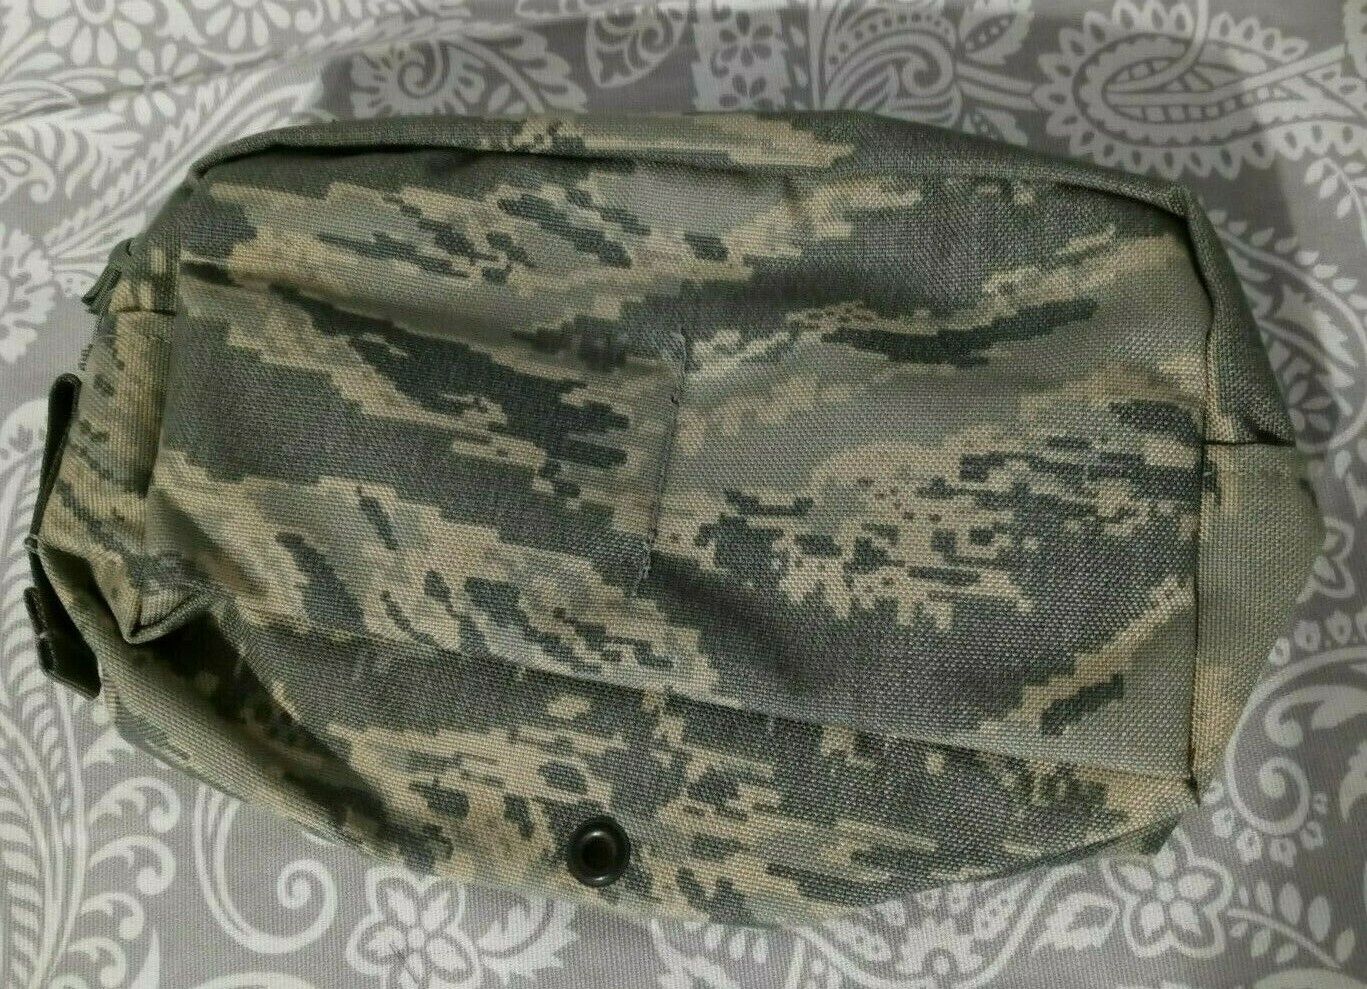 NEW Air Force USAF ABU DFLCS Horizontal Buttstock Utility Pouch MOLLE DF-LCS MMP